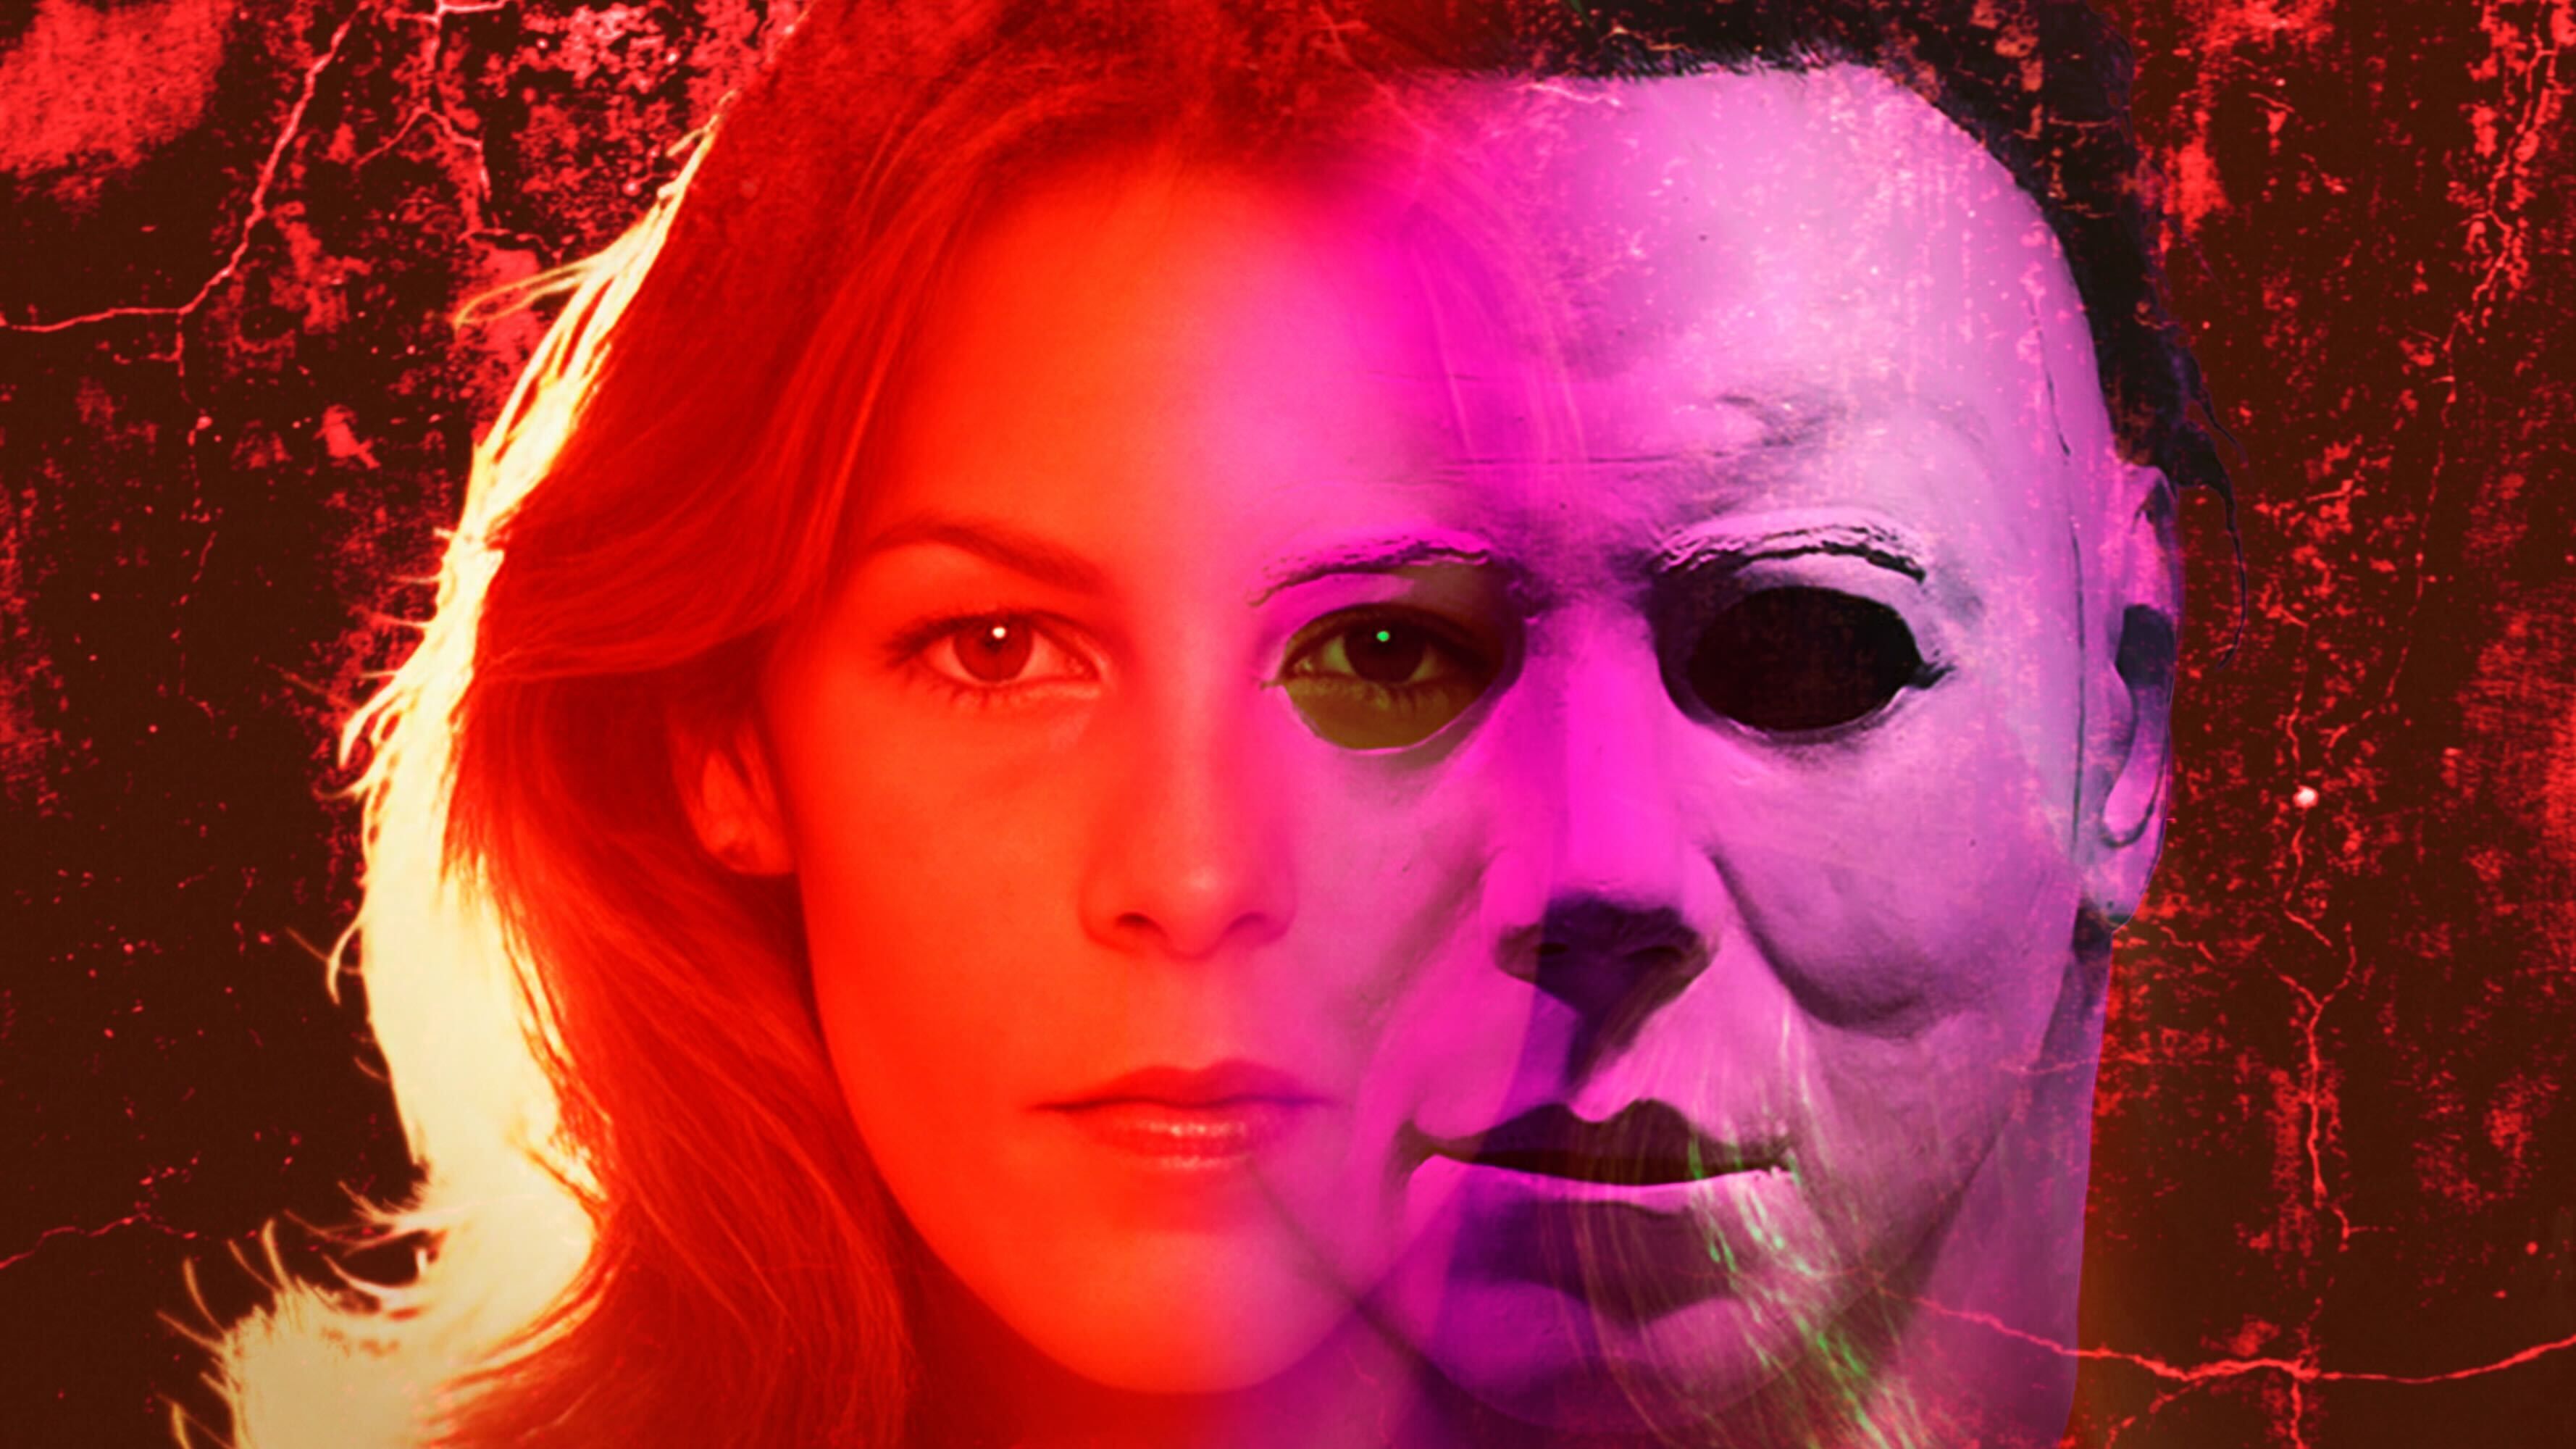 Laurie Strode and Michael Myers from Halloween morphing faces. 